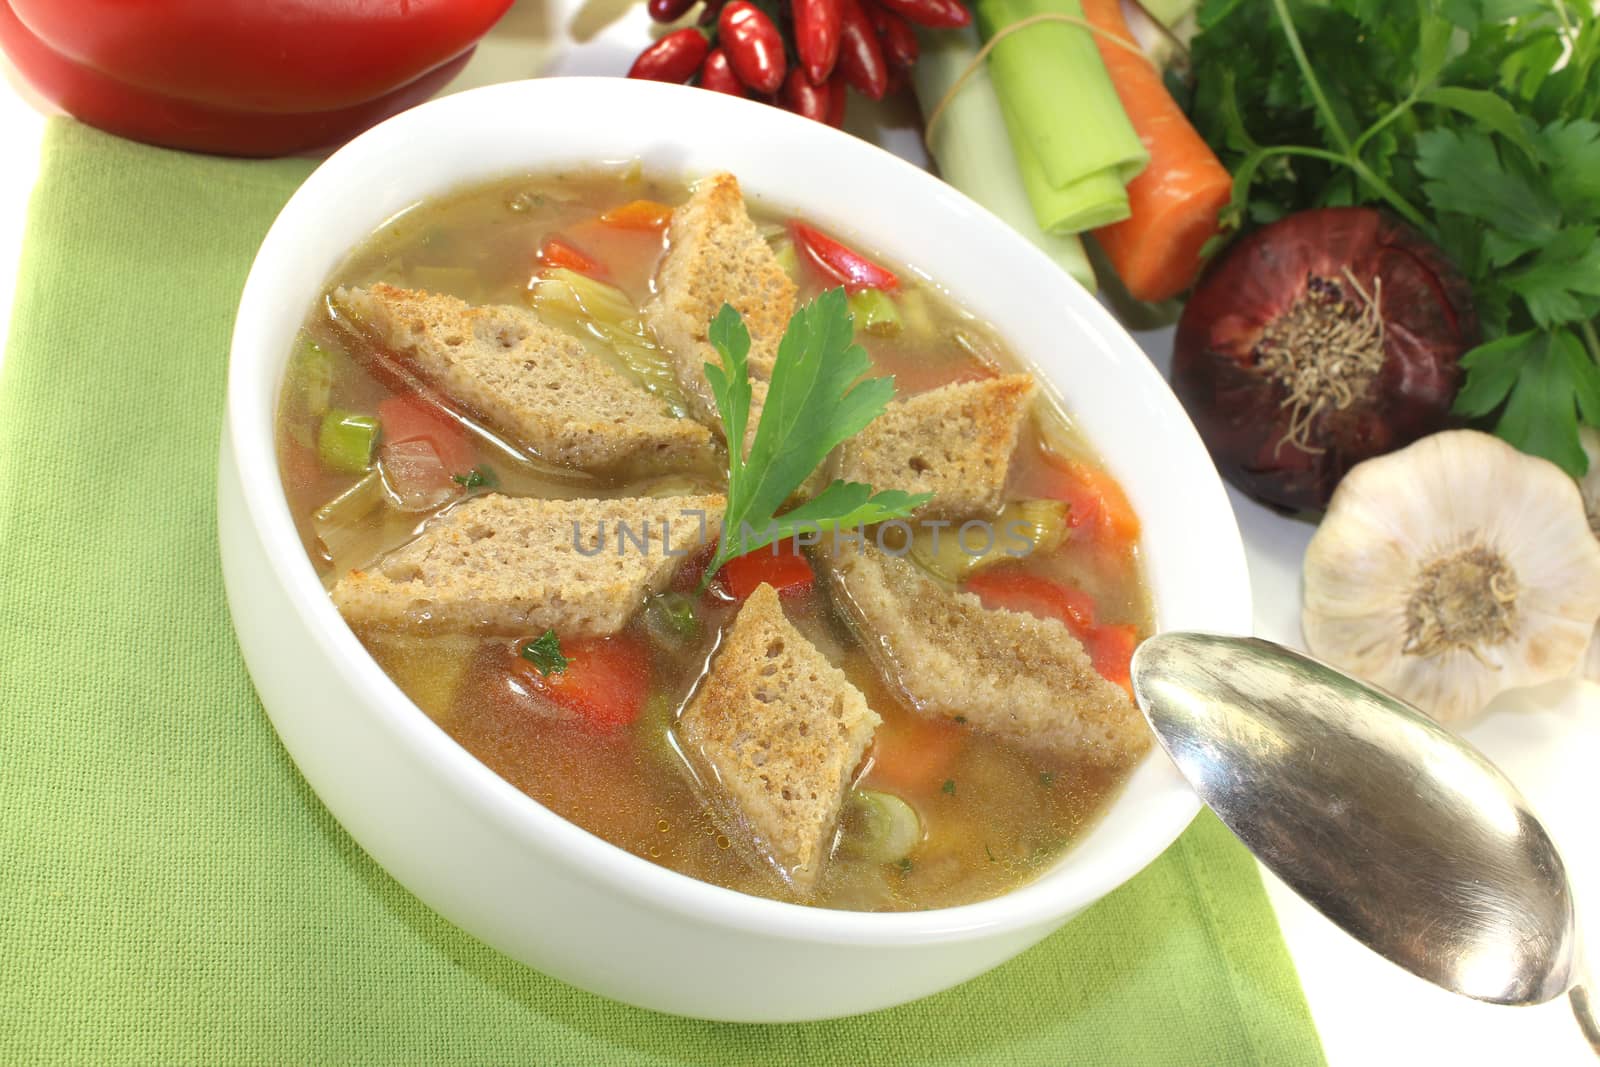 Bread soup with chilli on a light background